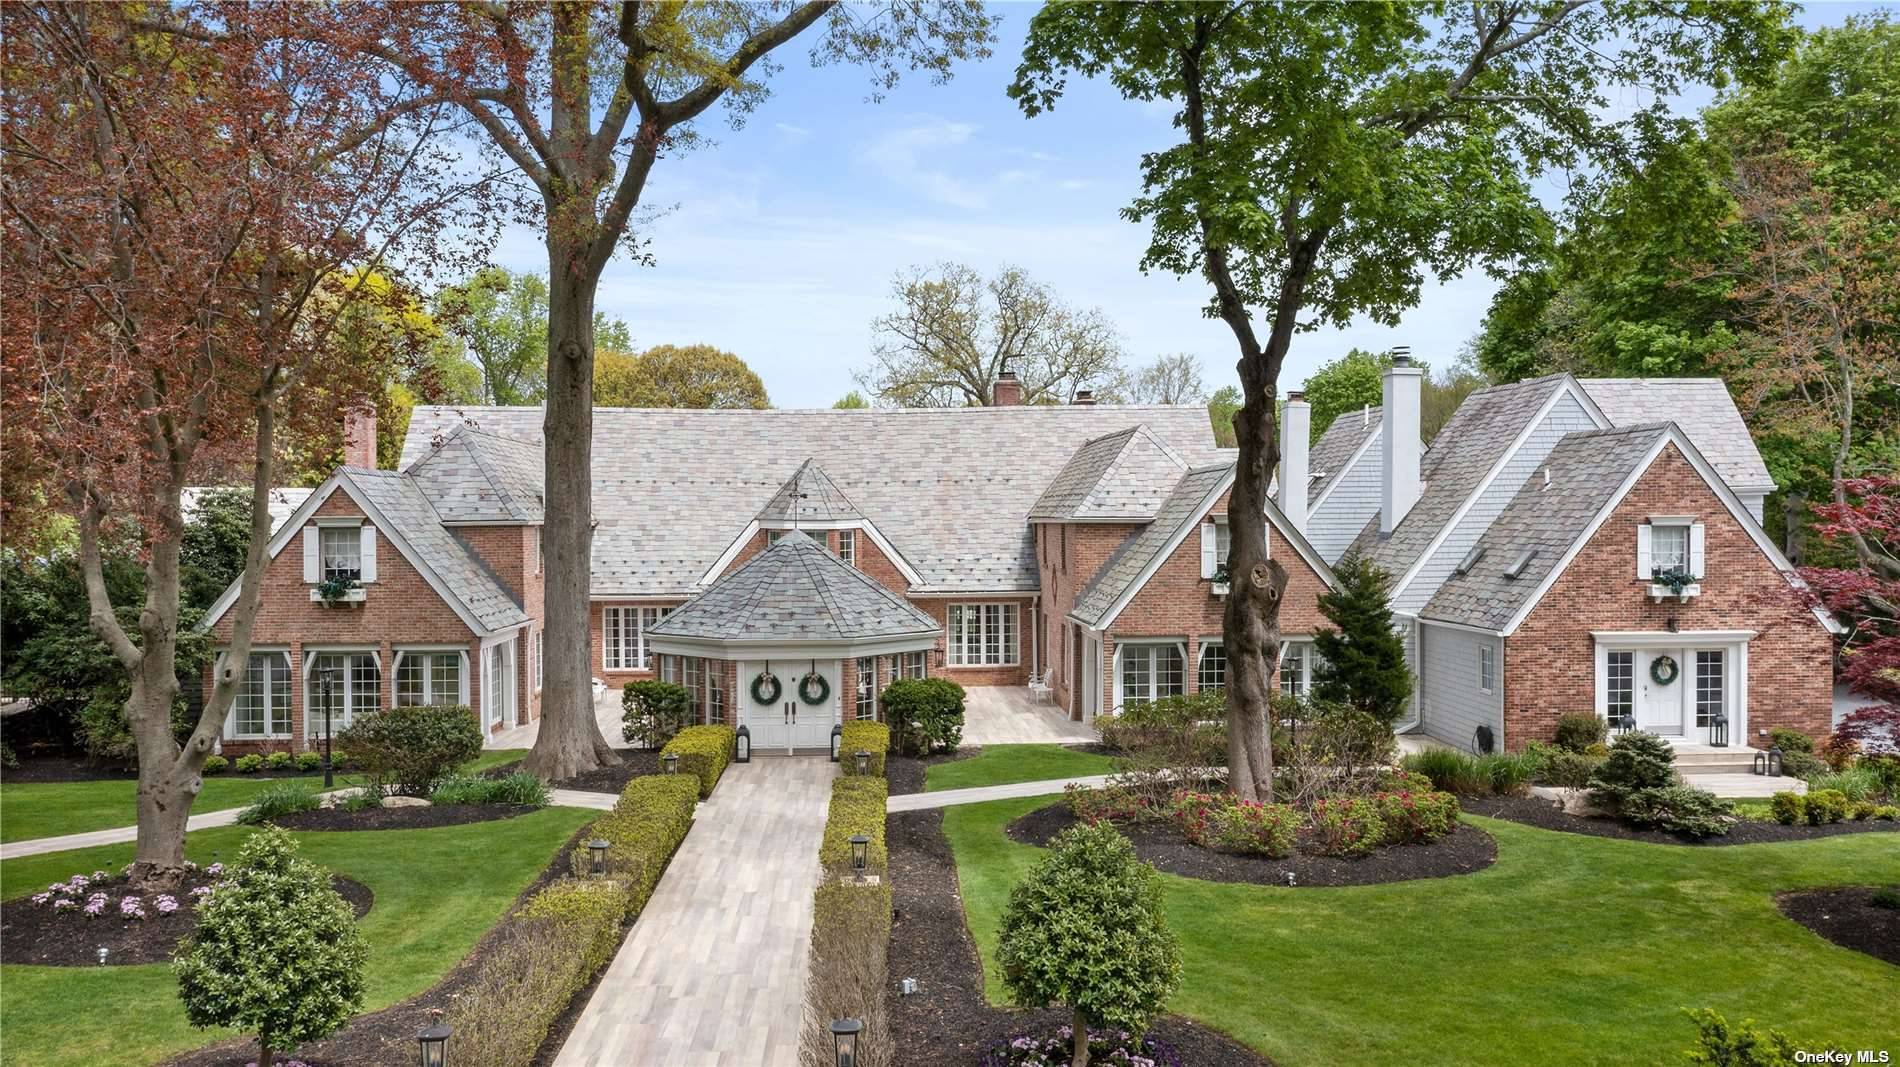 SWAN MANOR ! Perfectly Situated On Just Over Nine Lush Private Acres In The Heart Of Nissequogue Lies This Magnificent Gated Estate With Grand Scale Elegance.